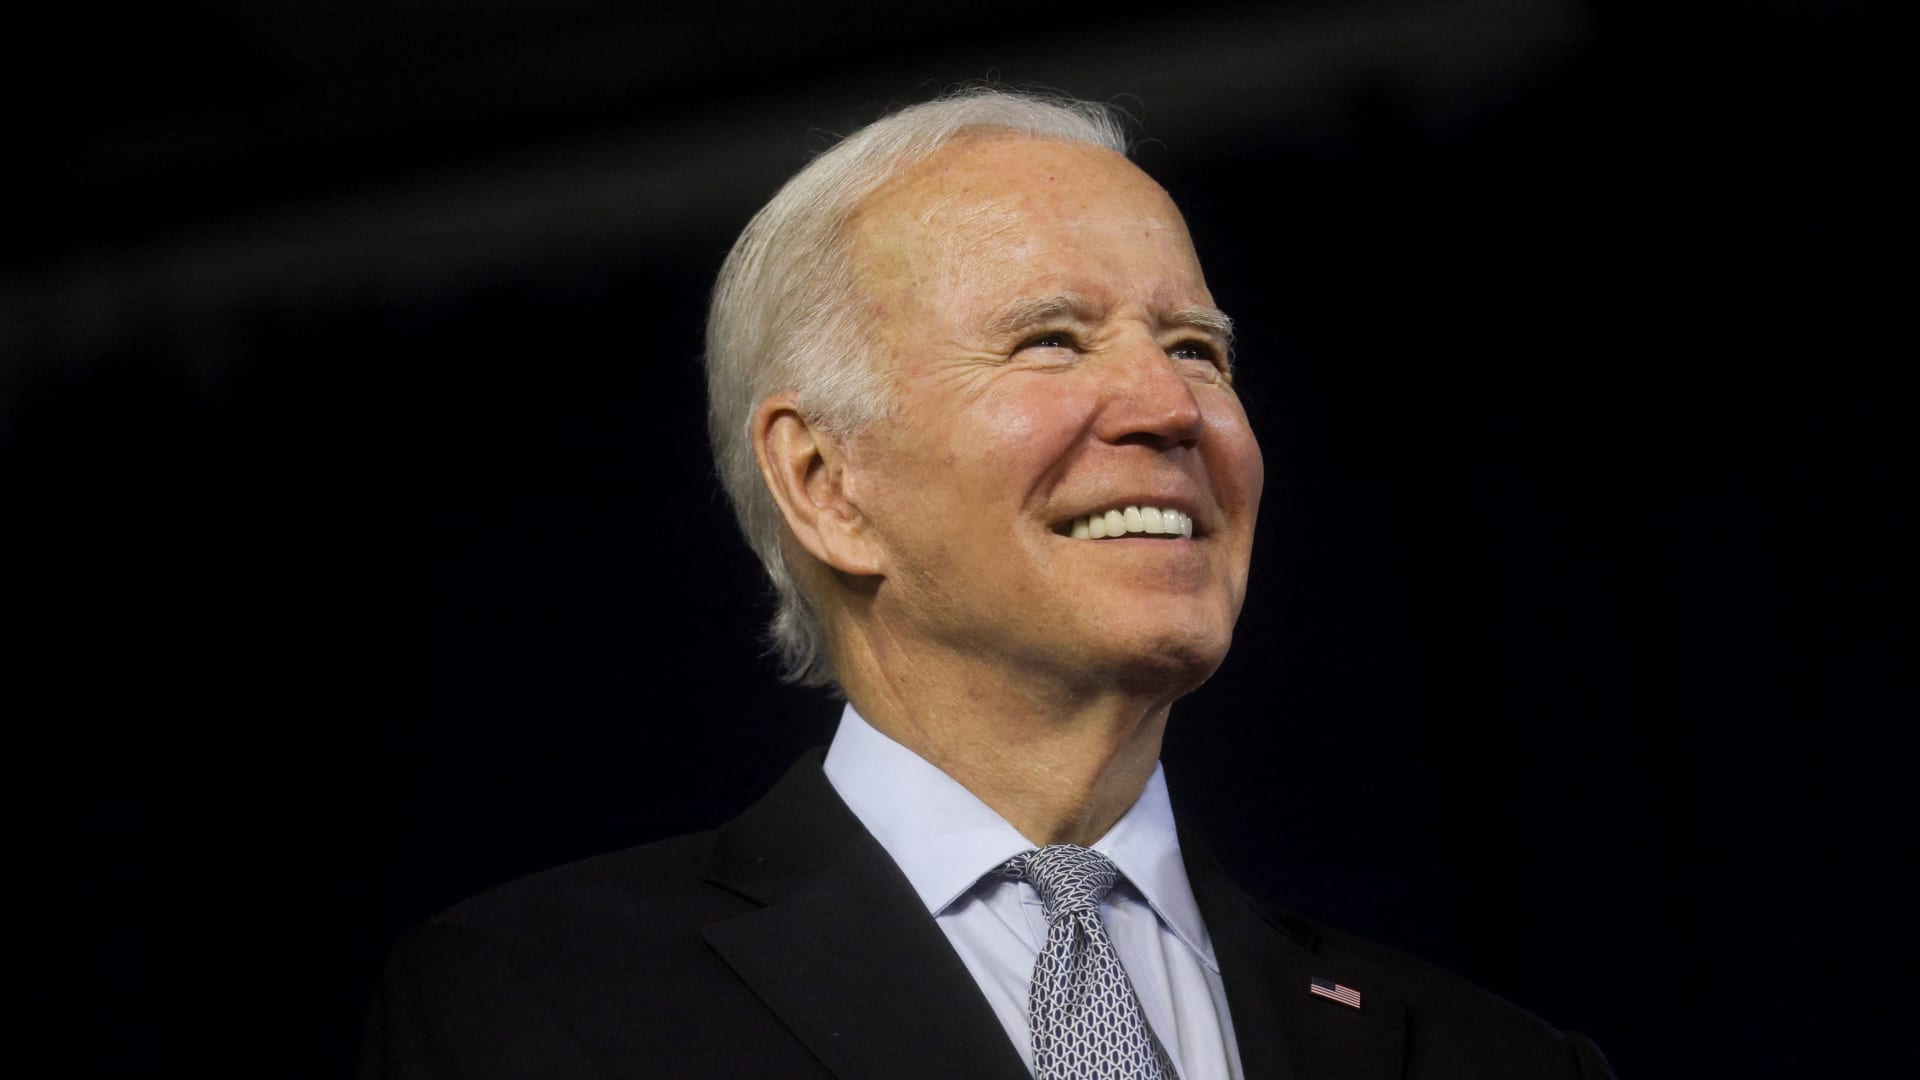 U.S. President Joe Biden smiles during a rally with Democratic nominee for Maryland Governor Wes Moore, U.S. Senator Chris Van Hollen and other Maryland Democrats, at Bowie State University in Bowie, Maryland, U.S., November 7, 2022.